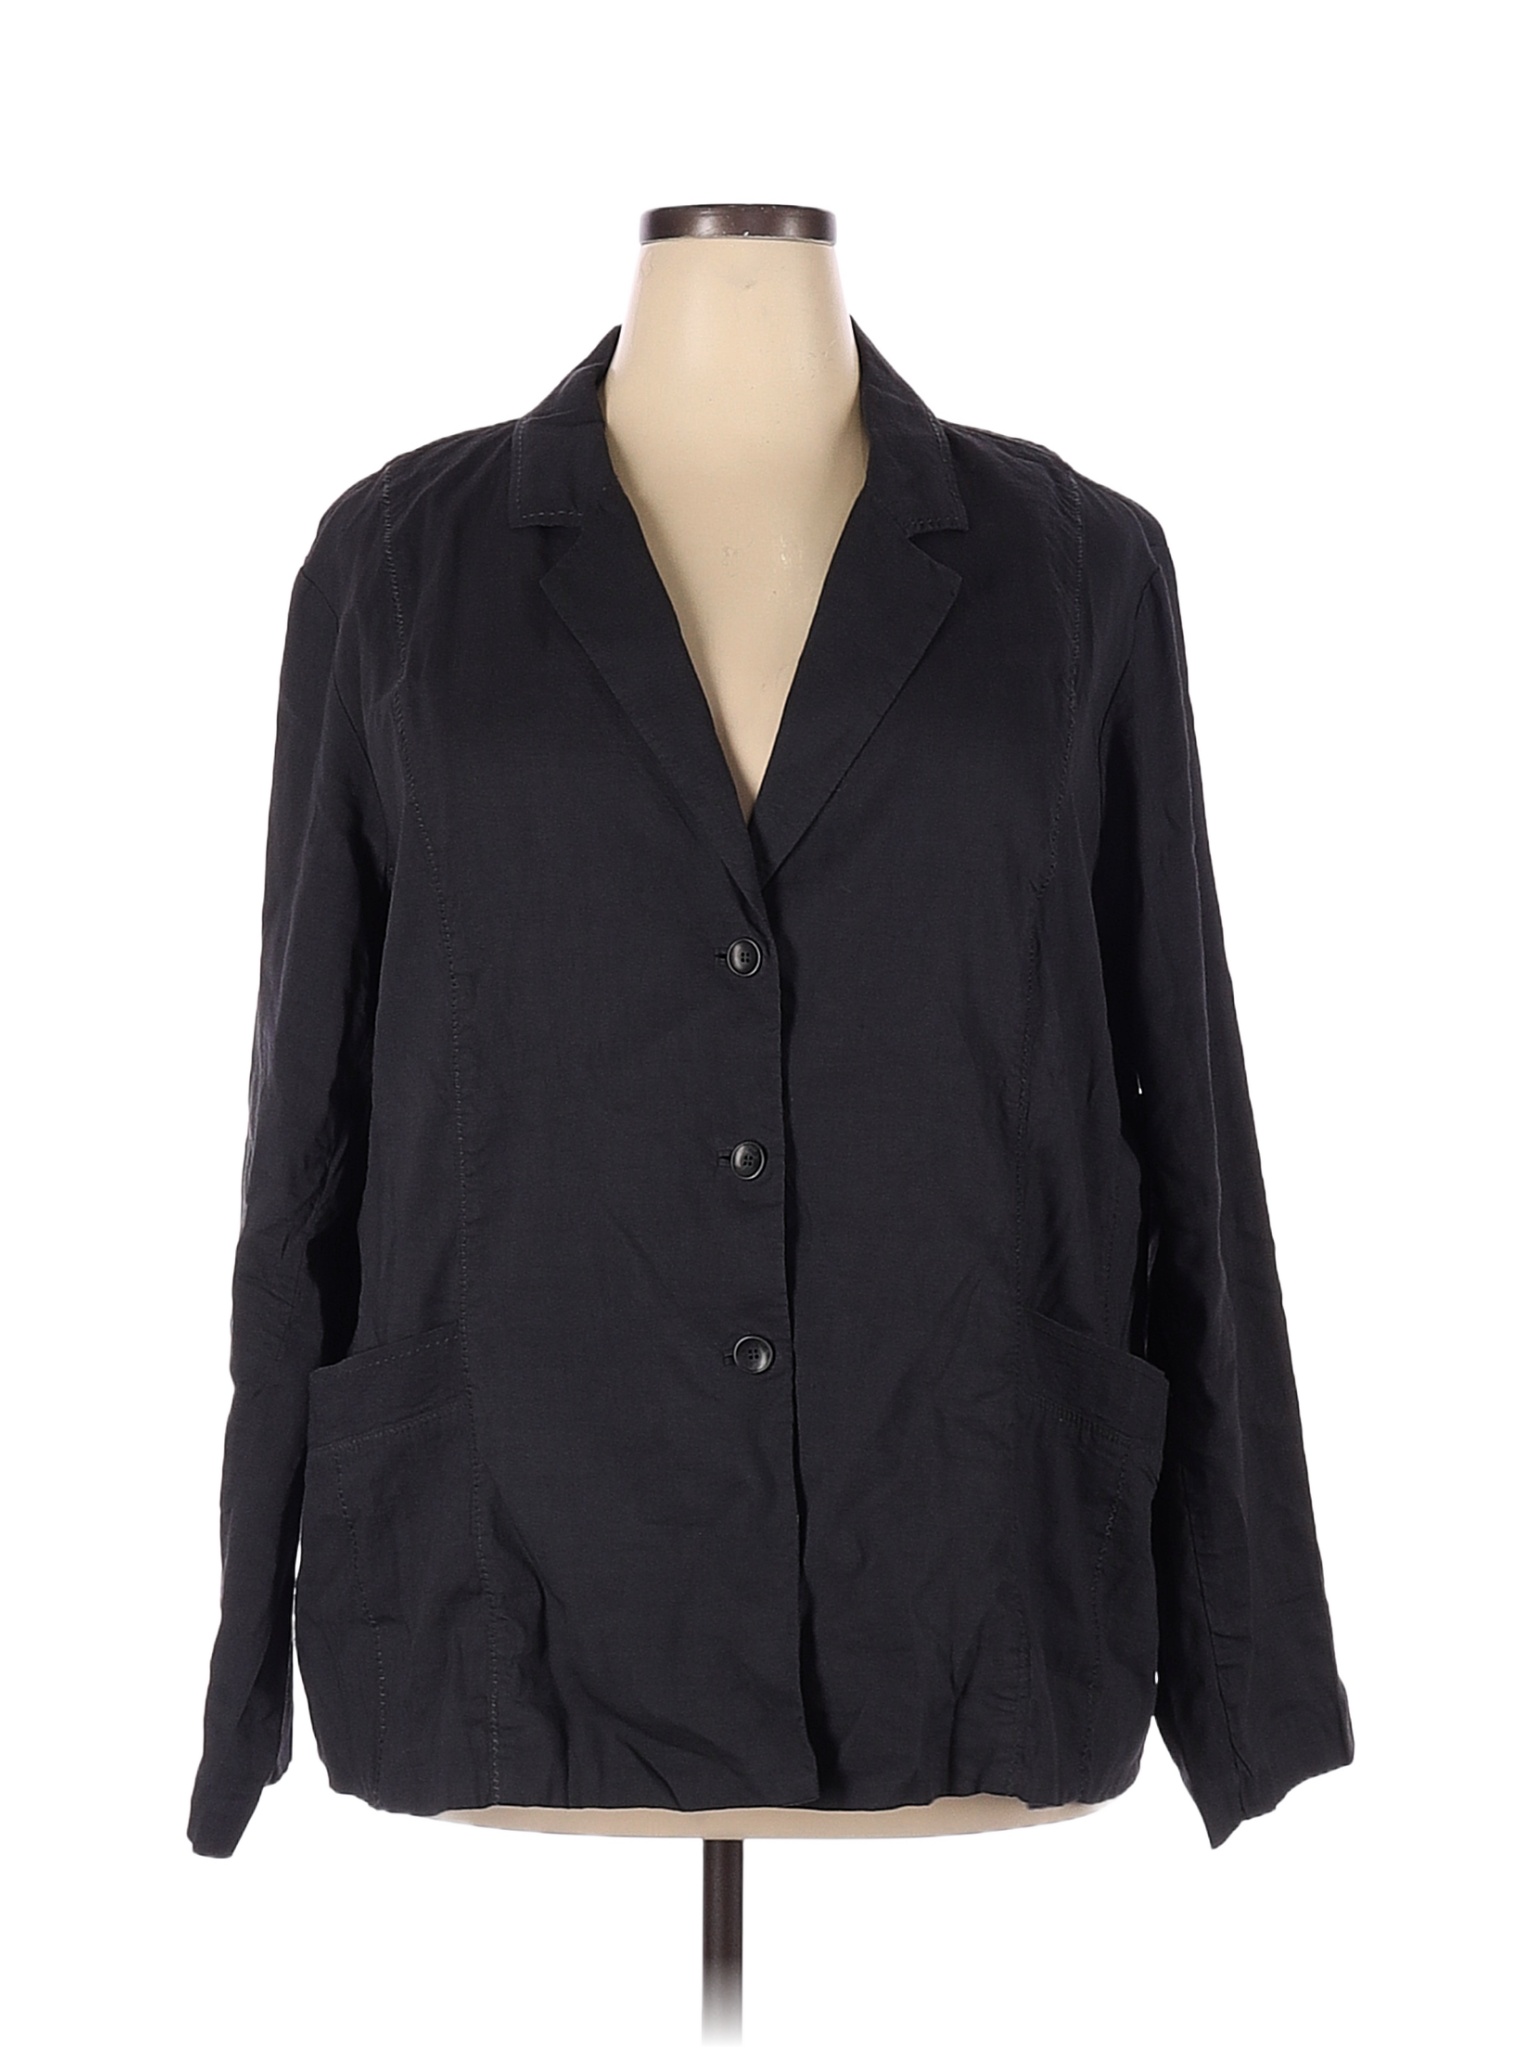 Eileen Fisher Solid Black Gray Jacket Size 22 (Plus) - 75% off | thredUP